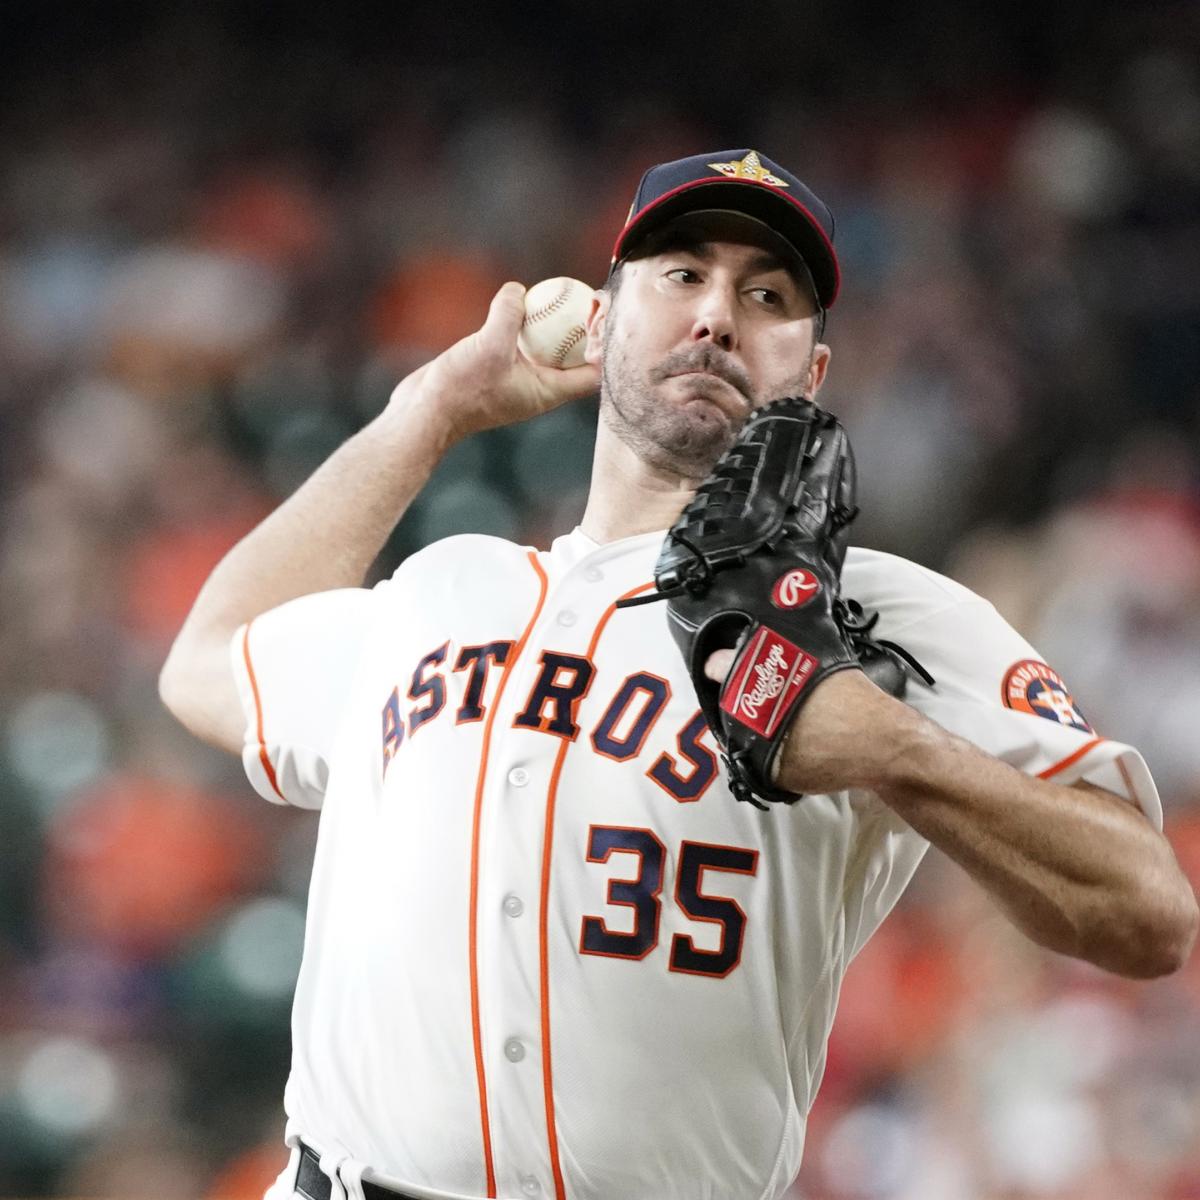 2019 NL Outstanding Pitcher